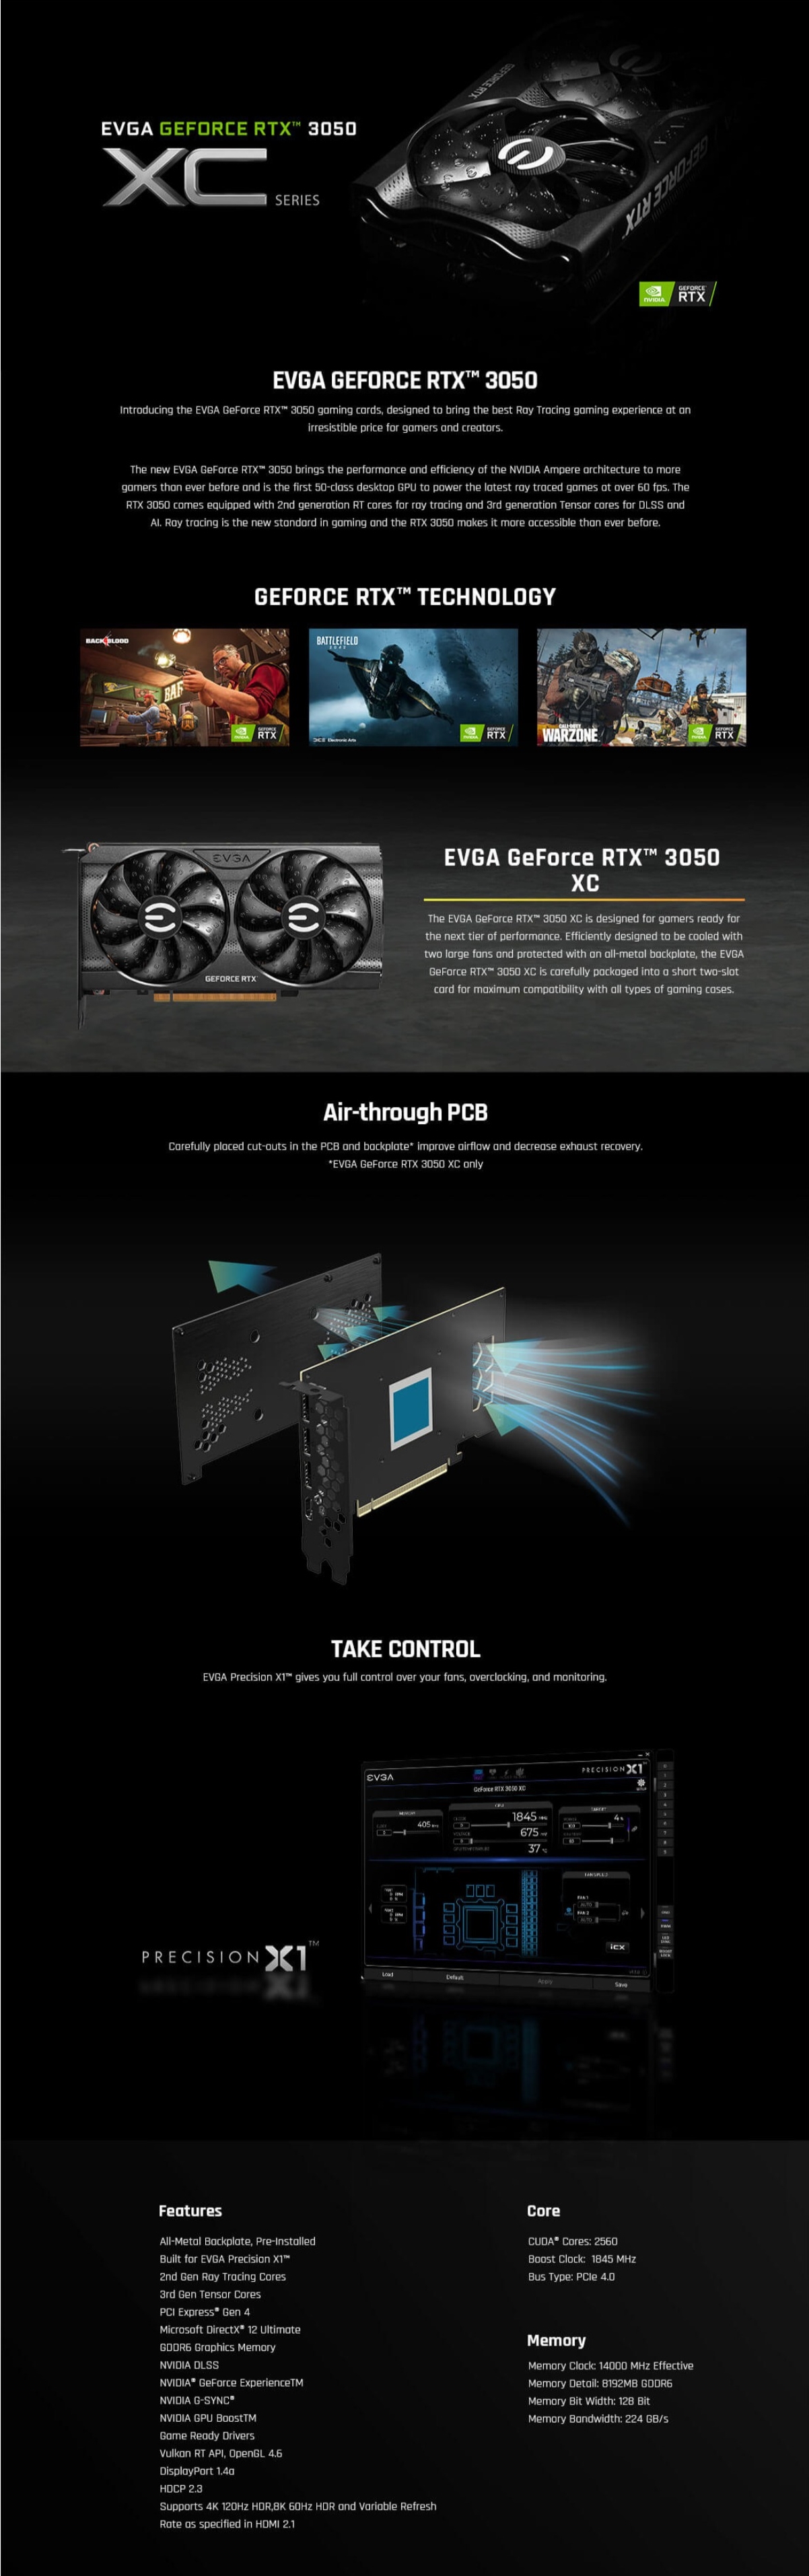 A large marketing image providing additional information about the product EVGA GeForce RTX 3050 XC Gaming 8GB GDDR6 - Additional alt info not provided